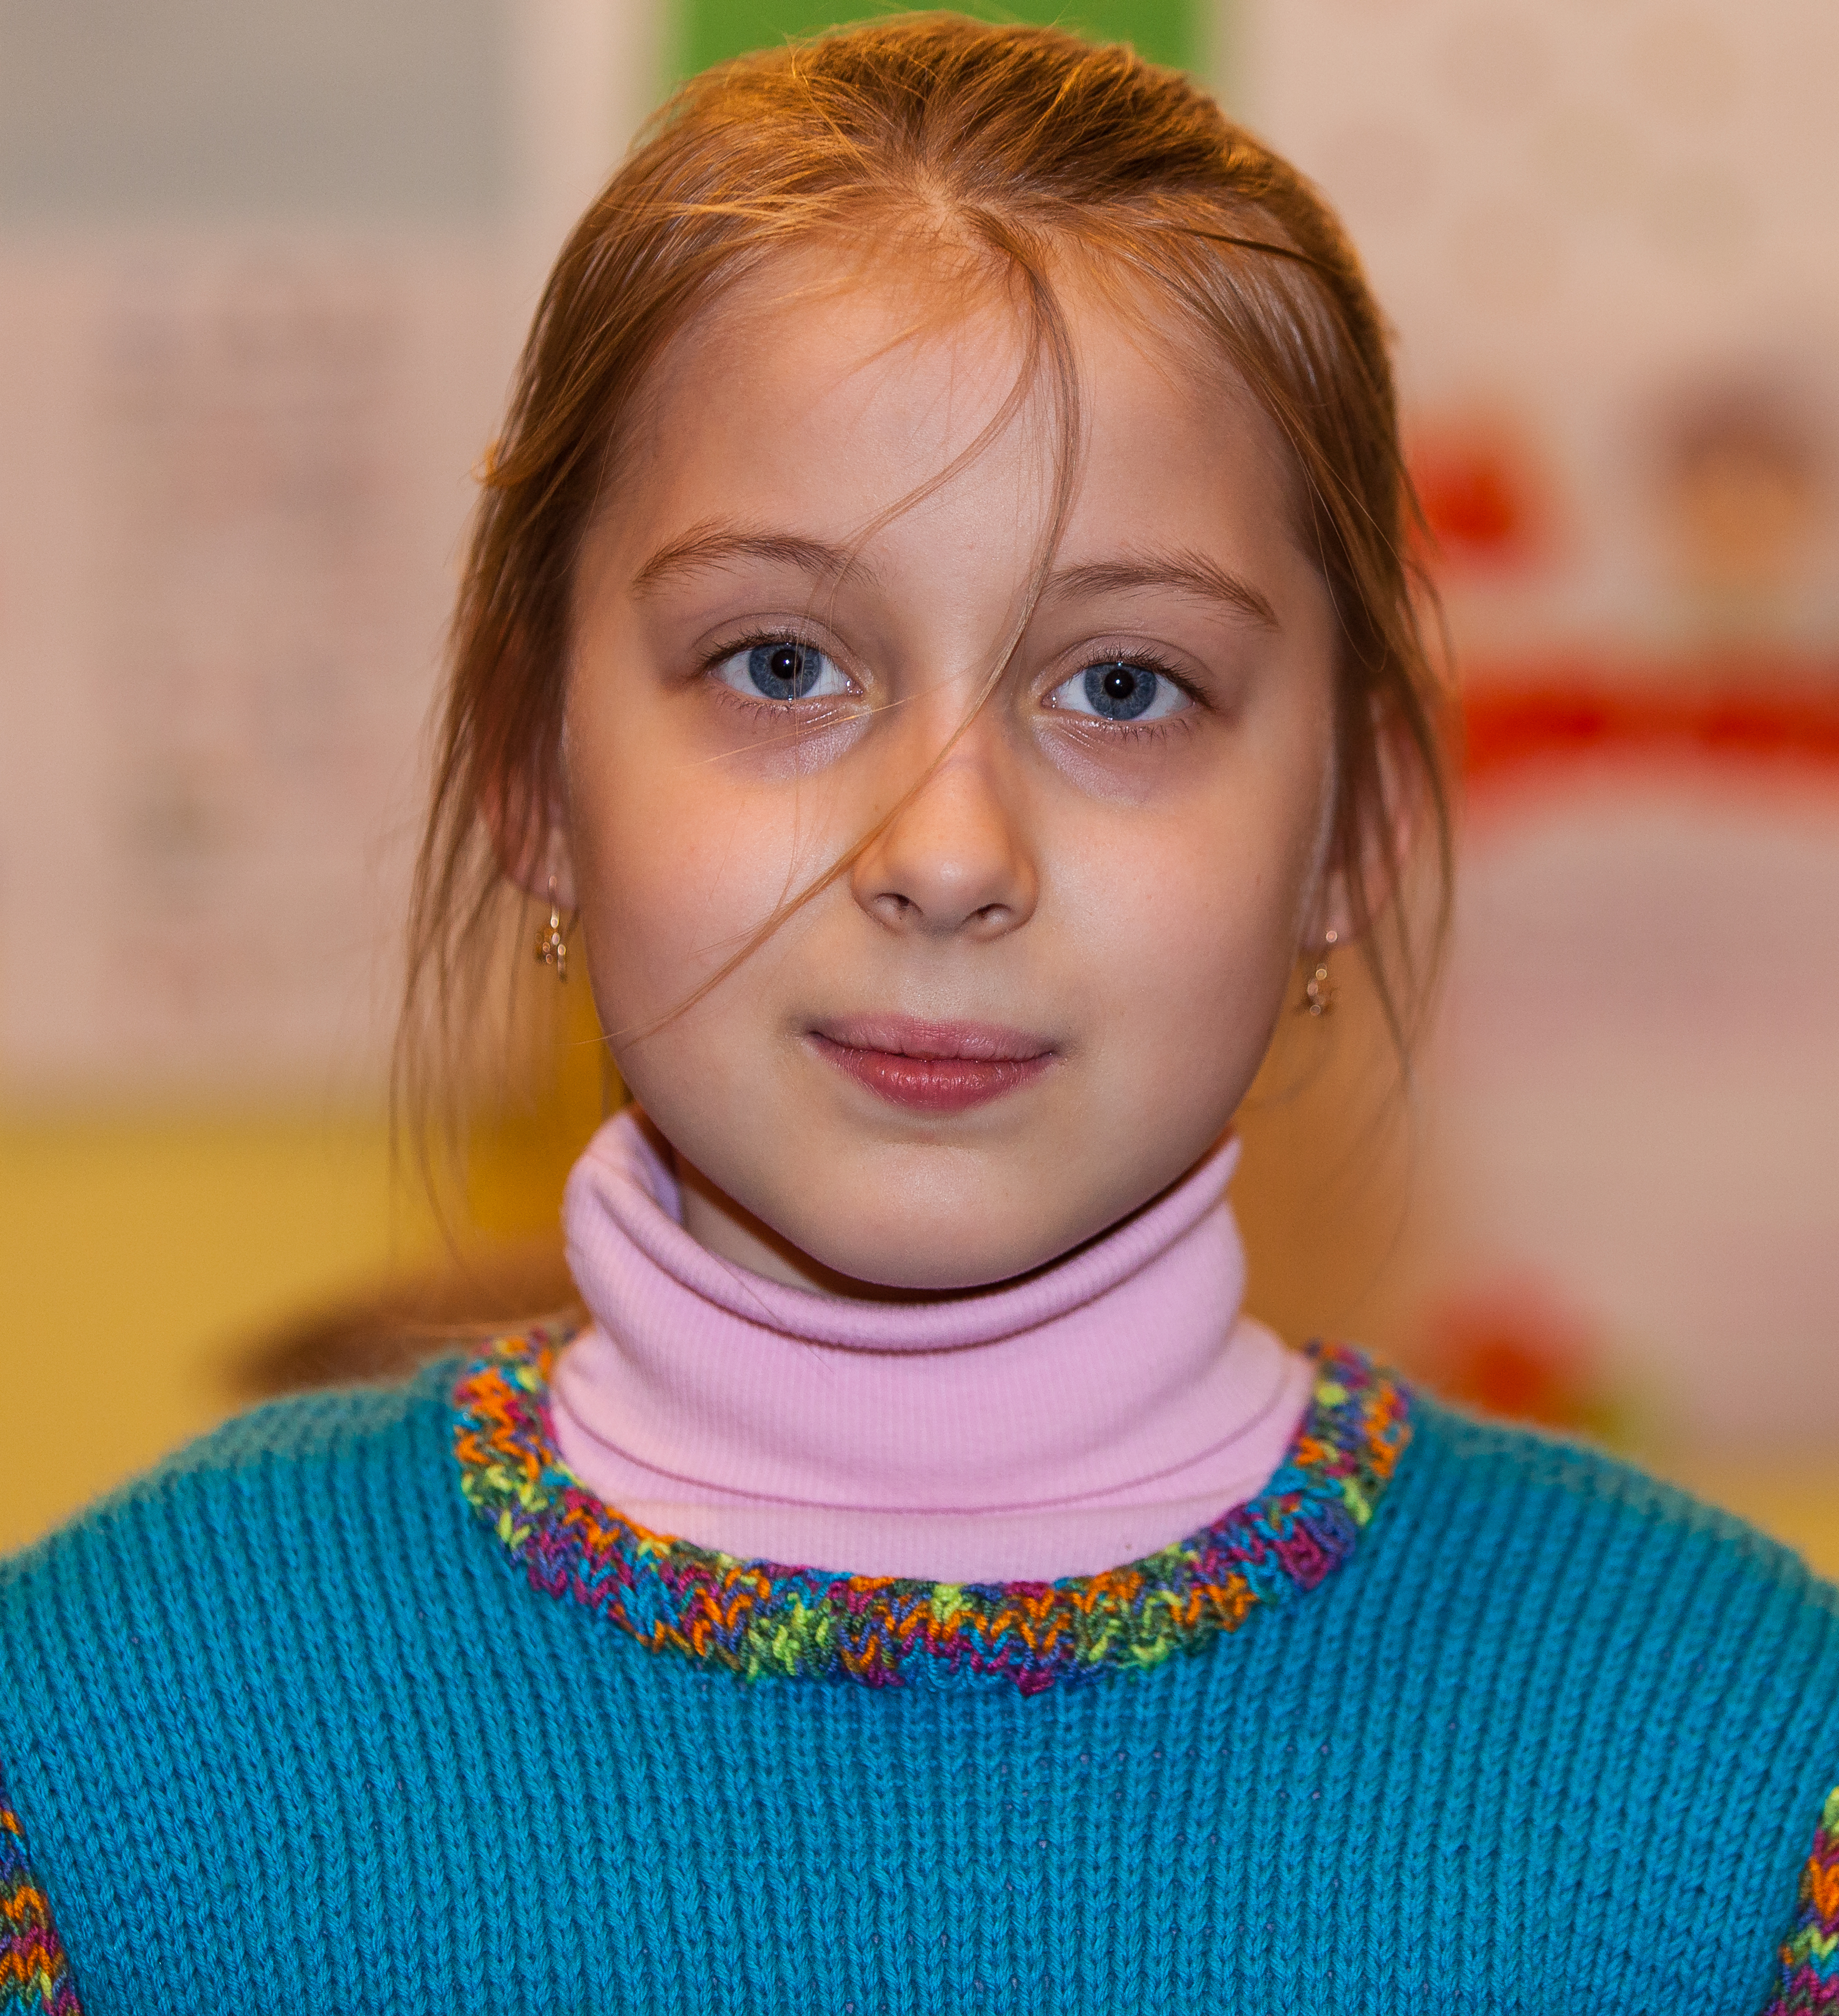 a young Catholic fair-haired pretty girl photographed in March 2014, image 2/6